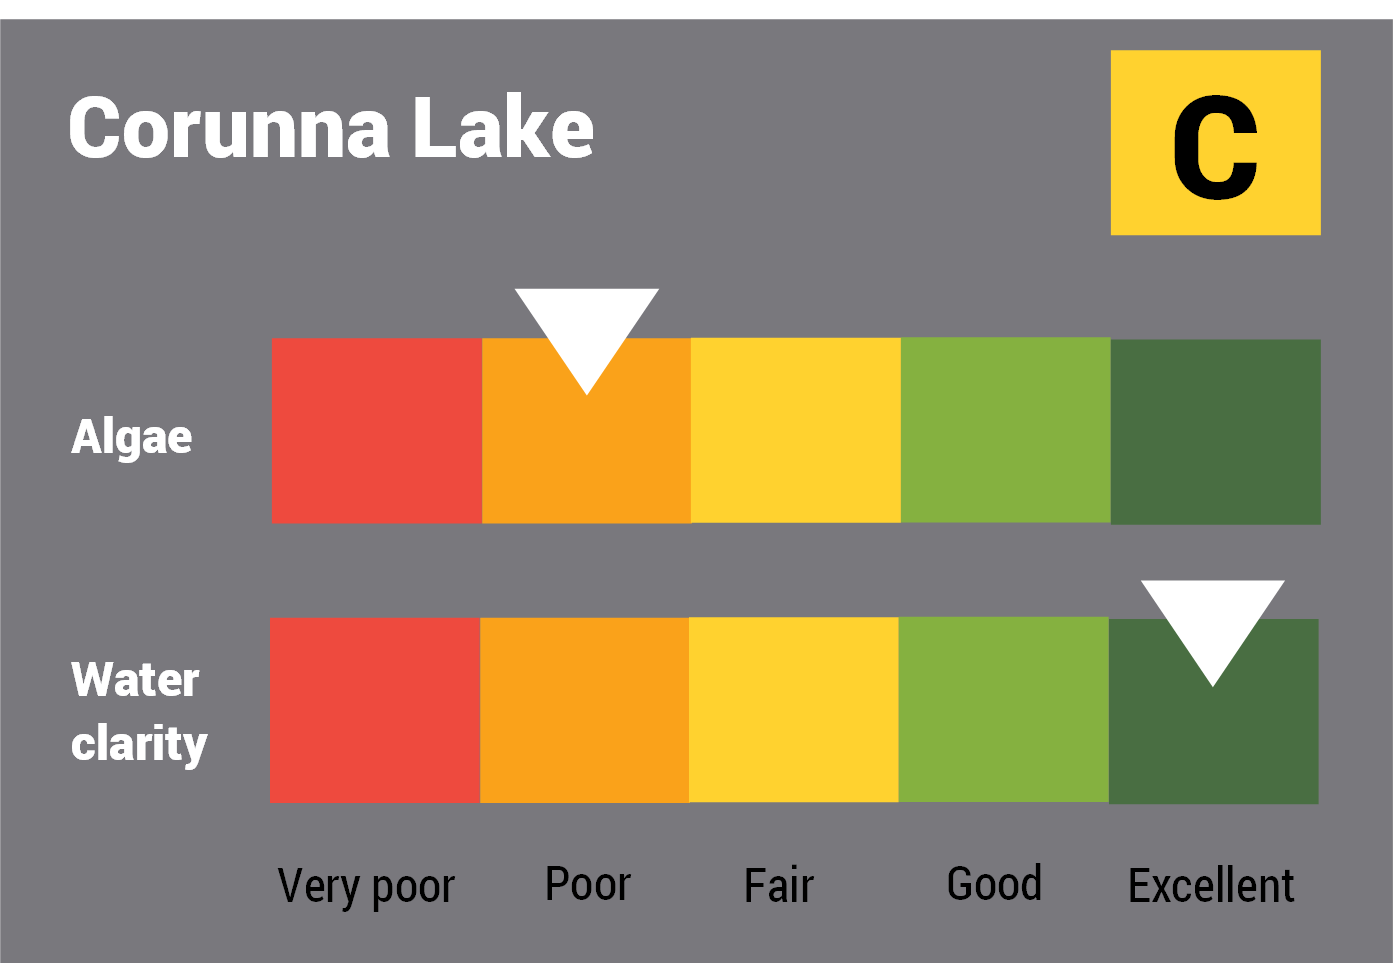 Corunna Lake water quality report card for algae and water clarity showing colour-coded ratings (red, orange, yellow, light green and dark green, which represent very poor, poor, fair, good and excellent, respectively). Algae is rated 'fair' and water clarity is rated 'excellent' giving an overall rating of 'good' or 'B'.